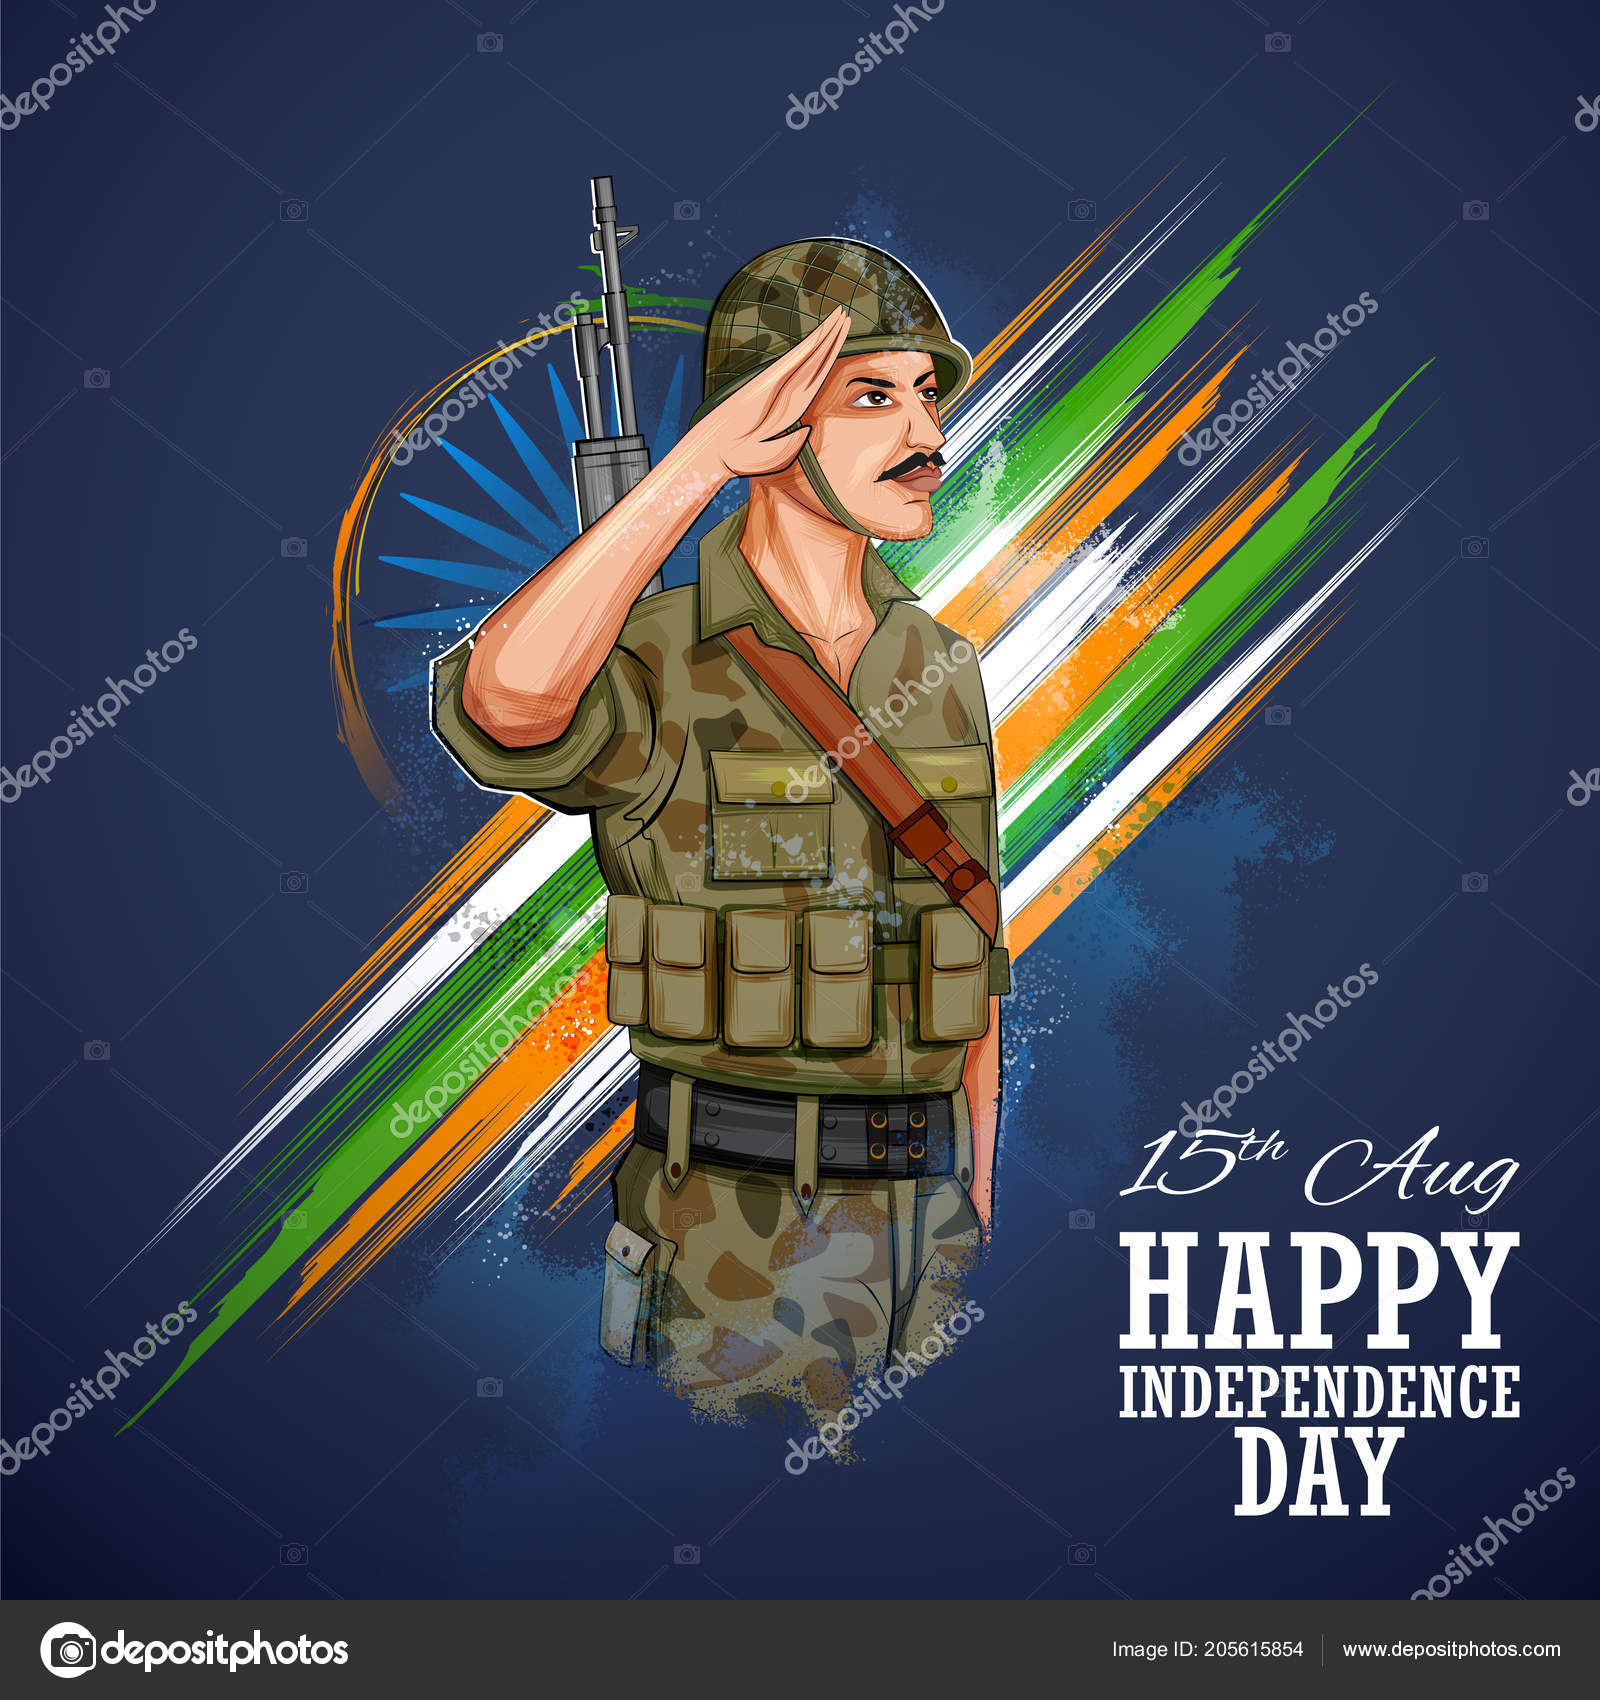 School Happy Independence Day Poster - HD Wallpaper 